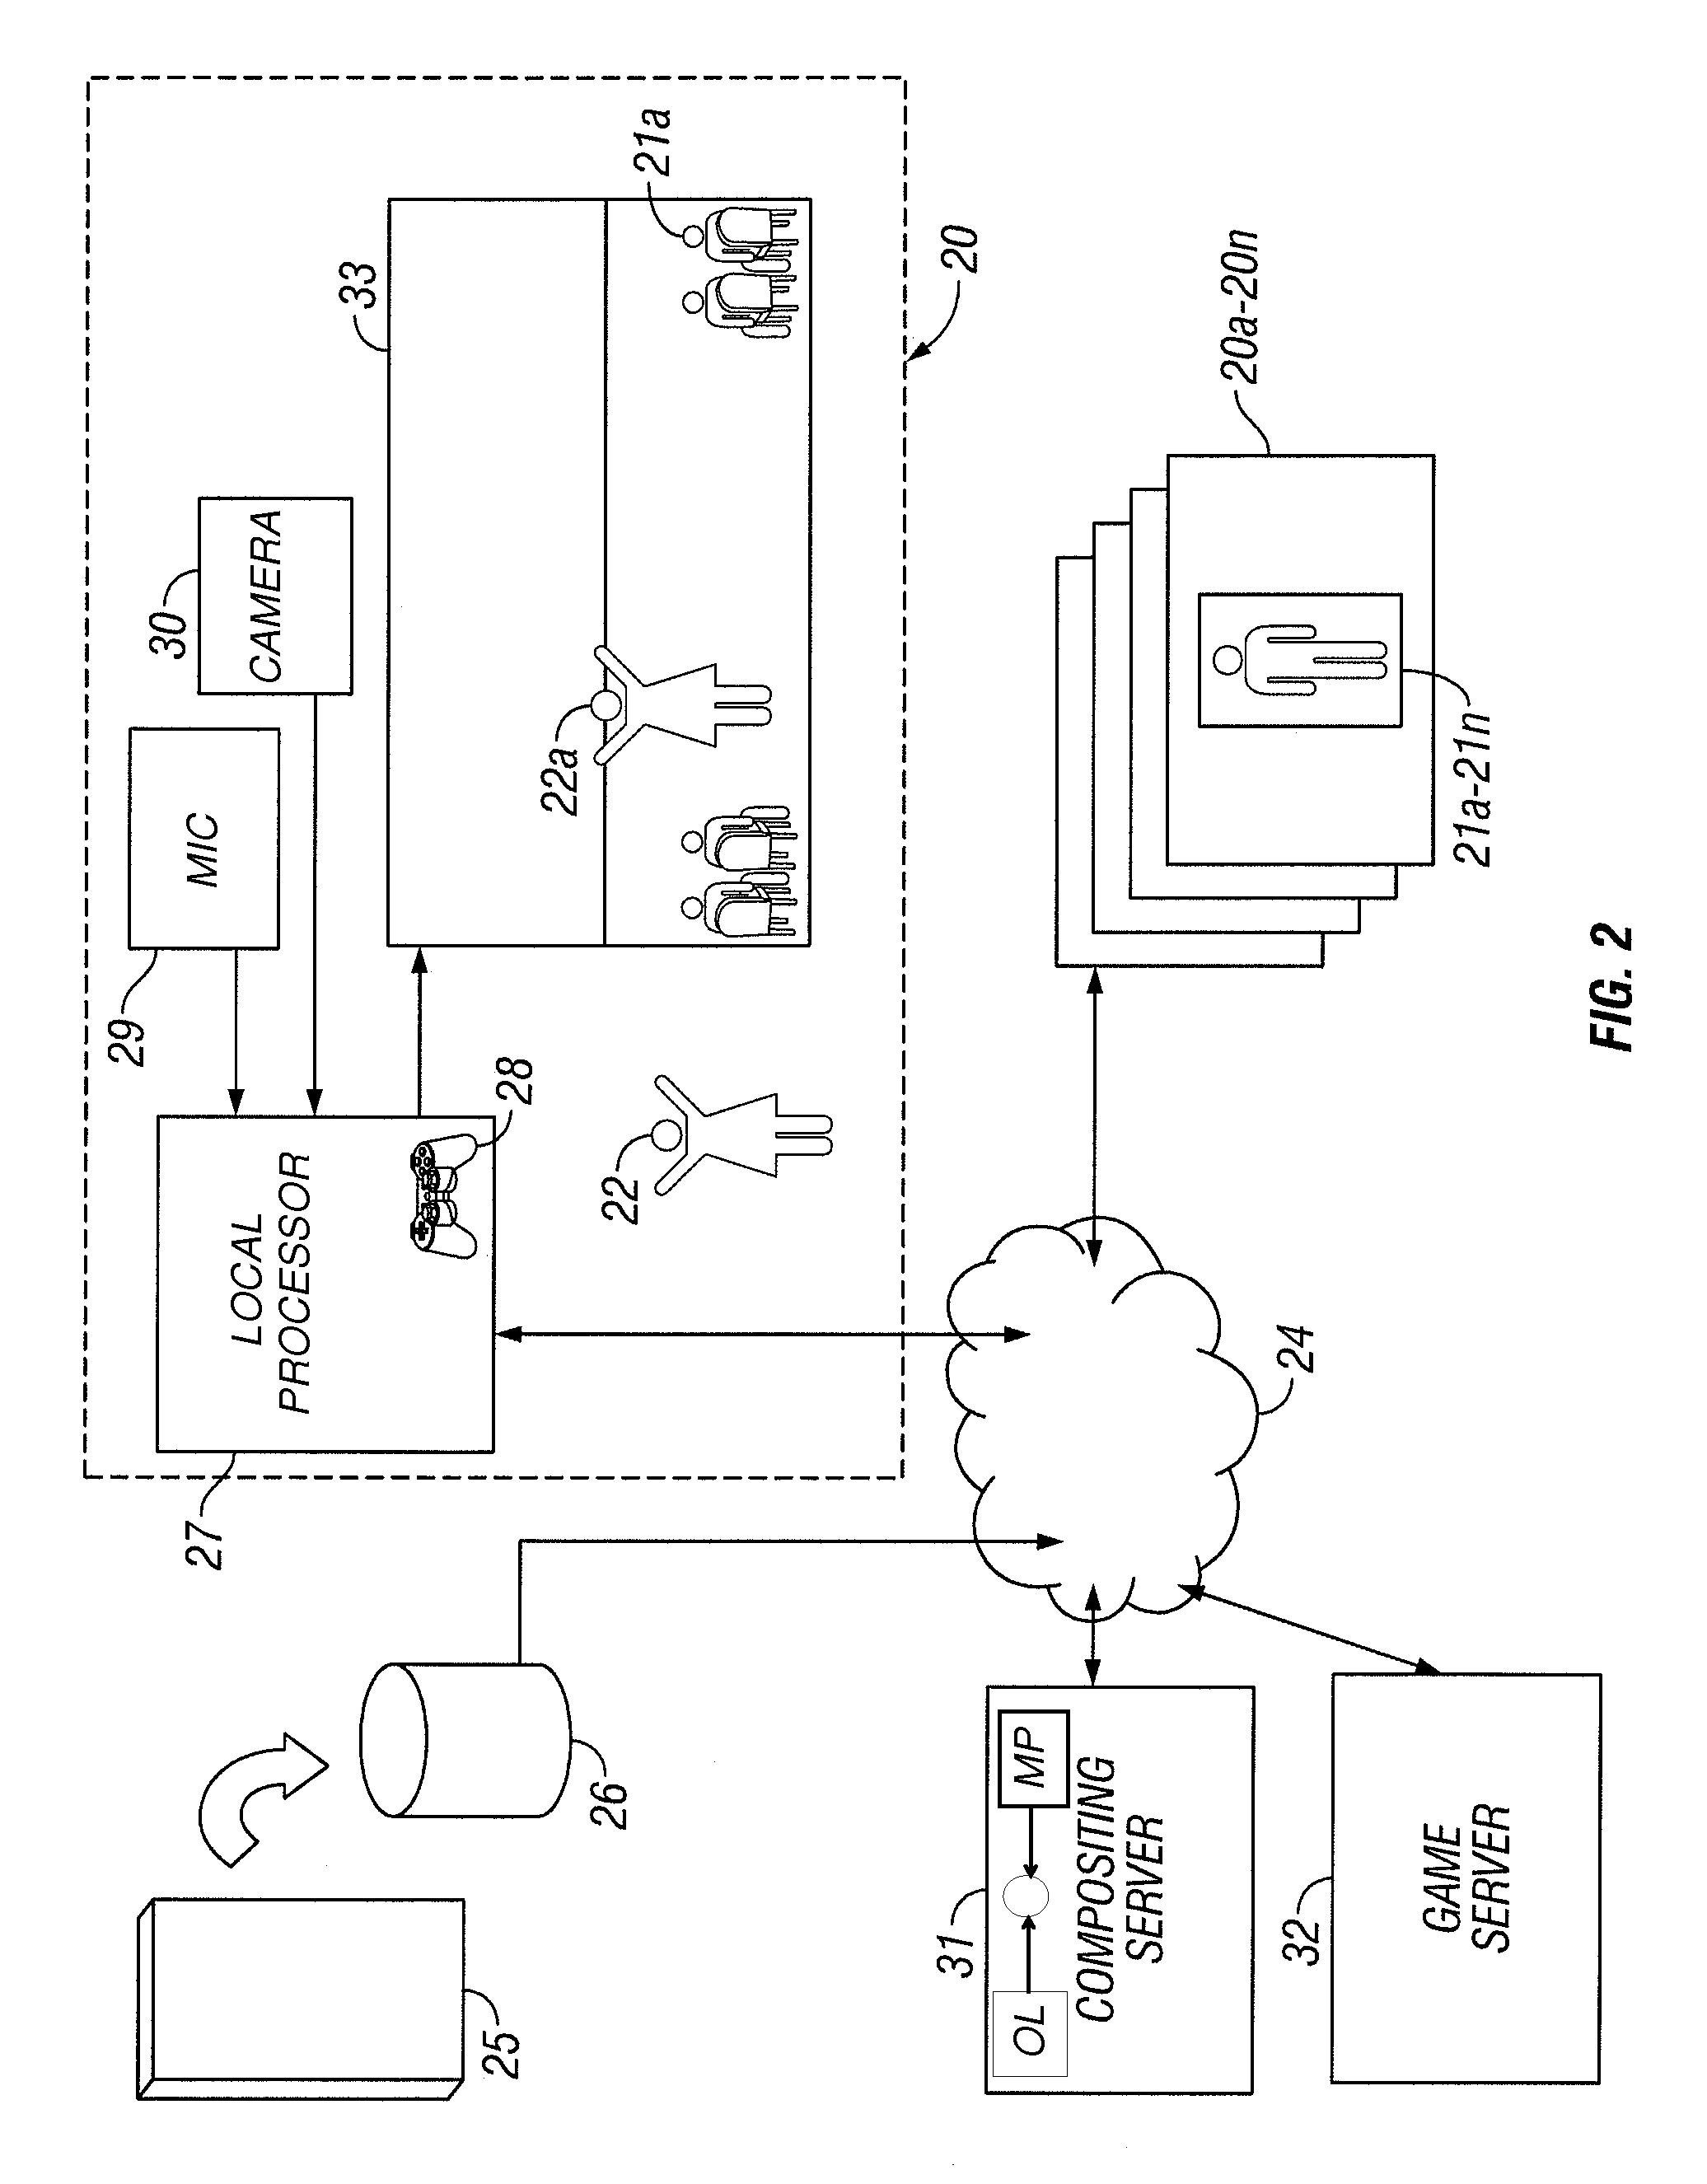 Method and Apparatus For Real-Time Viewer Interaction With A Media Presentation